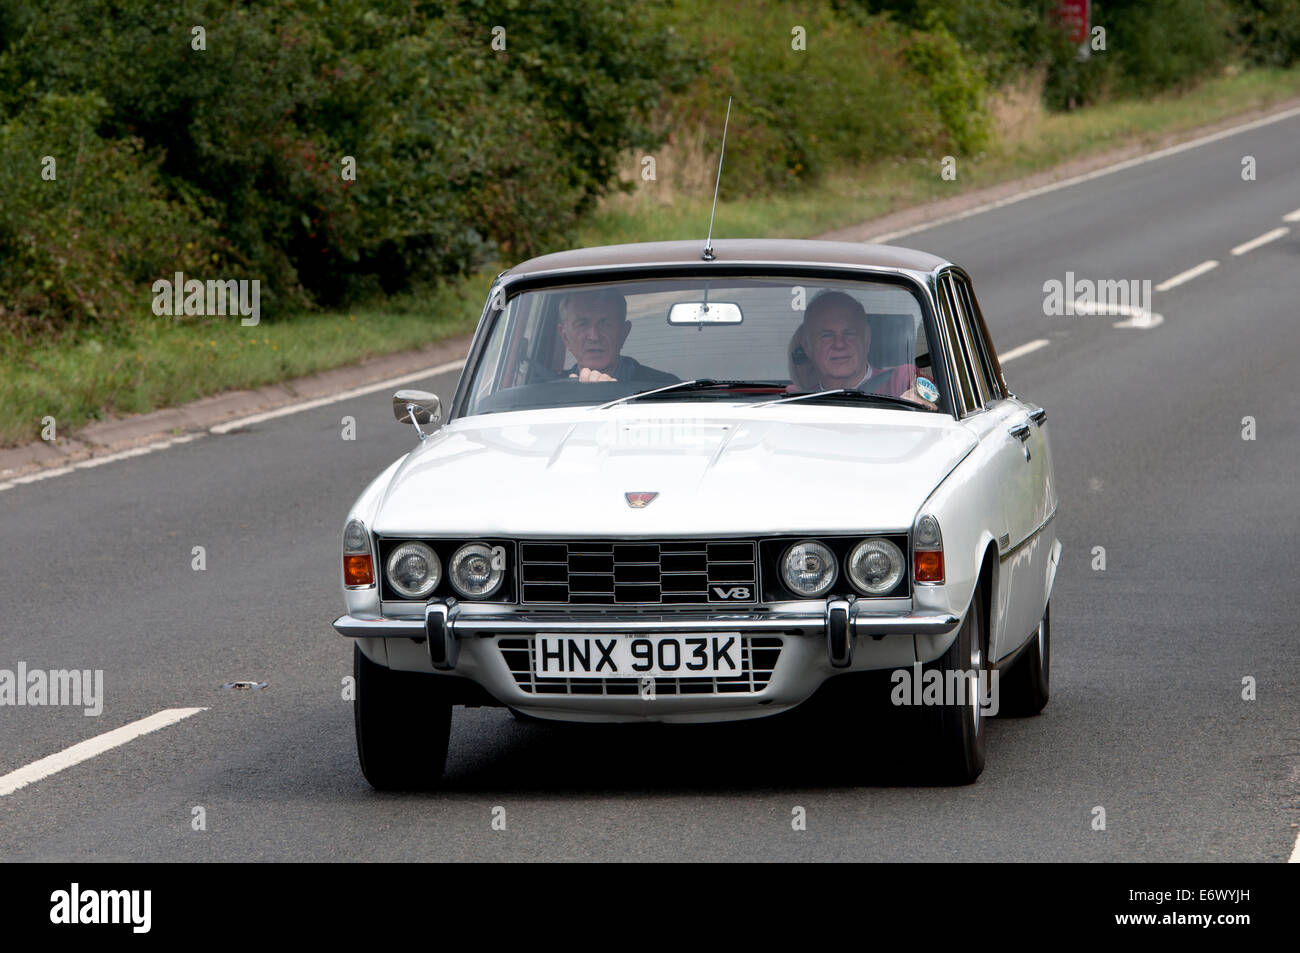 Rover P6 3500S V8 car on the Fosse Way road, Warwickshire, UK Stock Photo